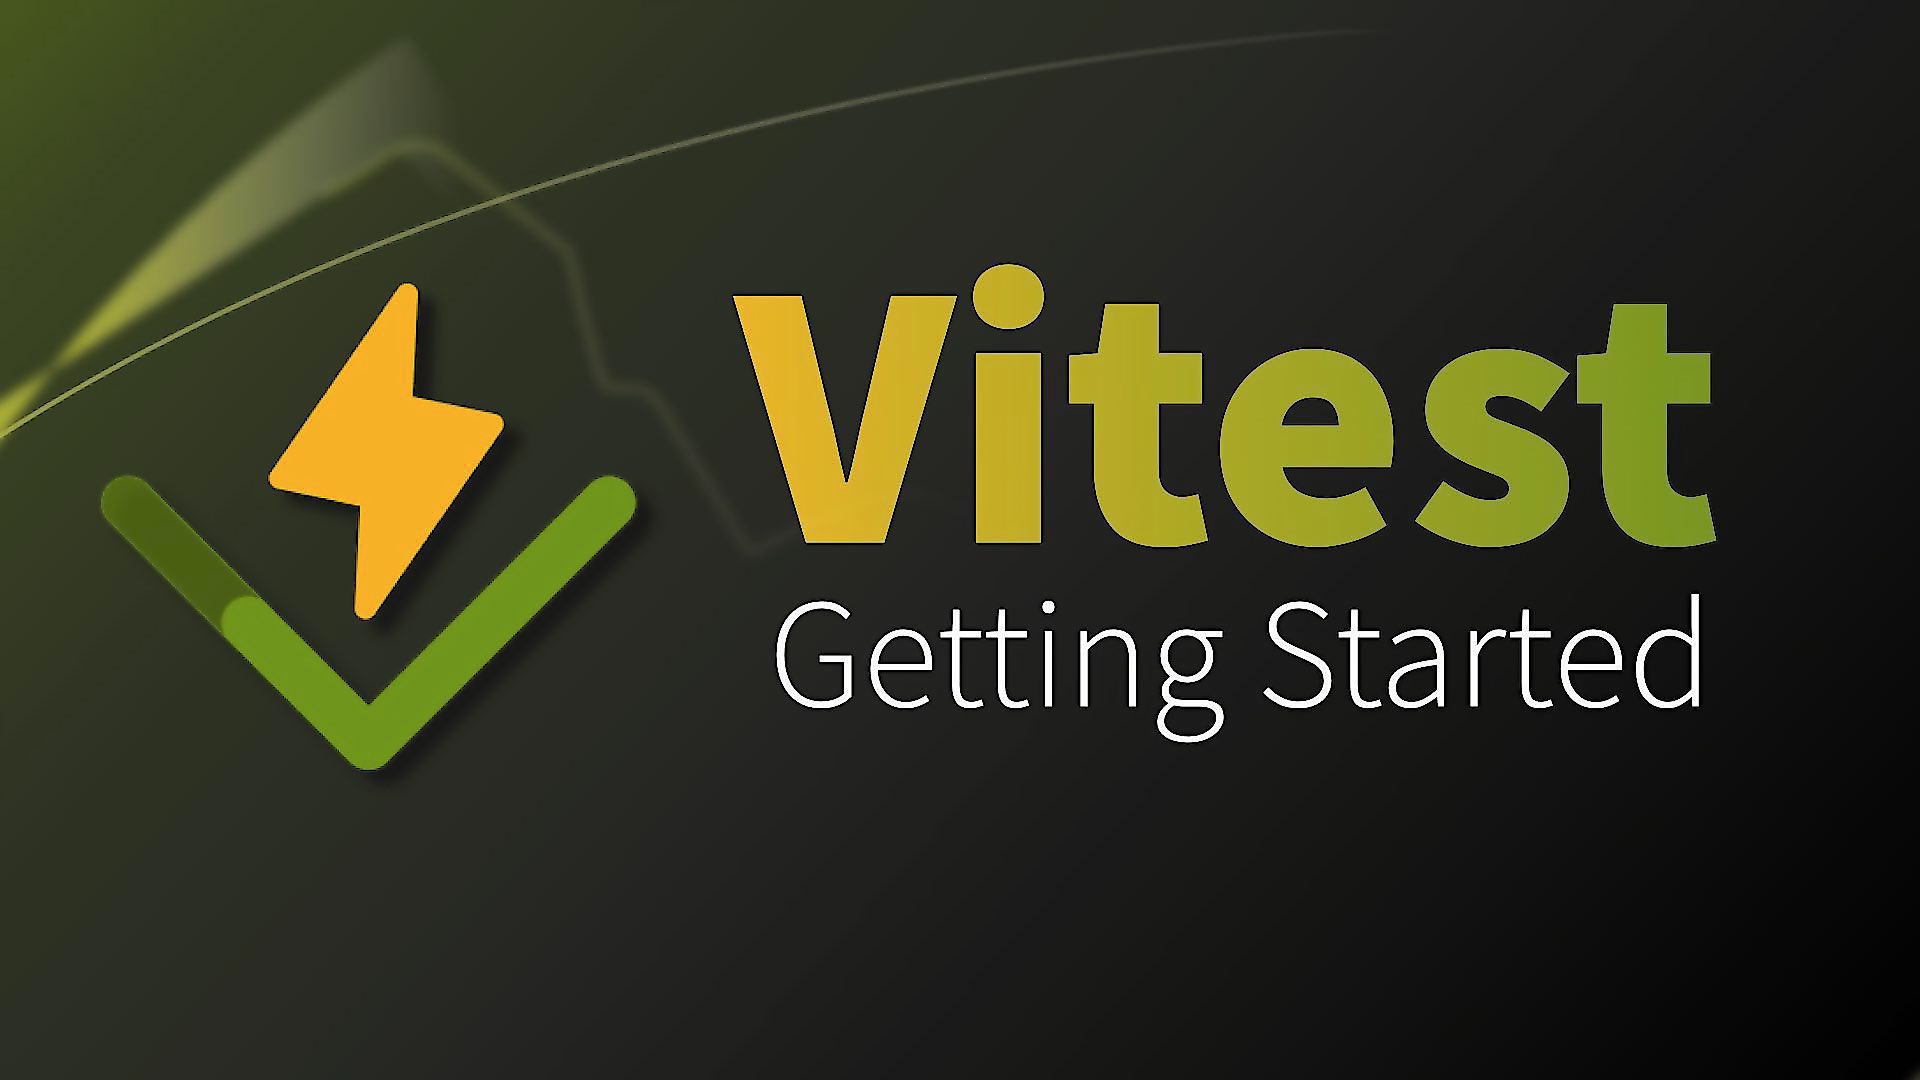 Getting Started with Vitest